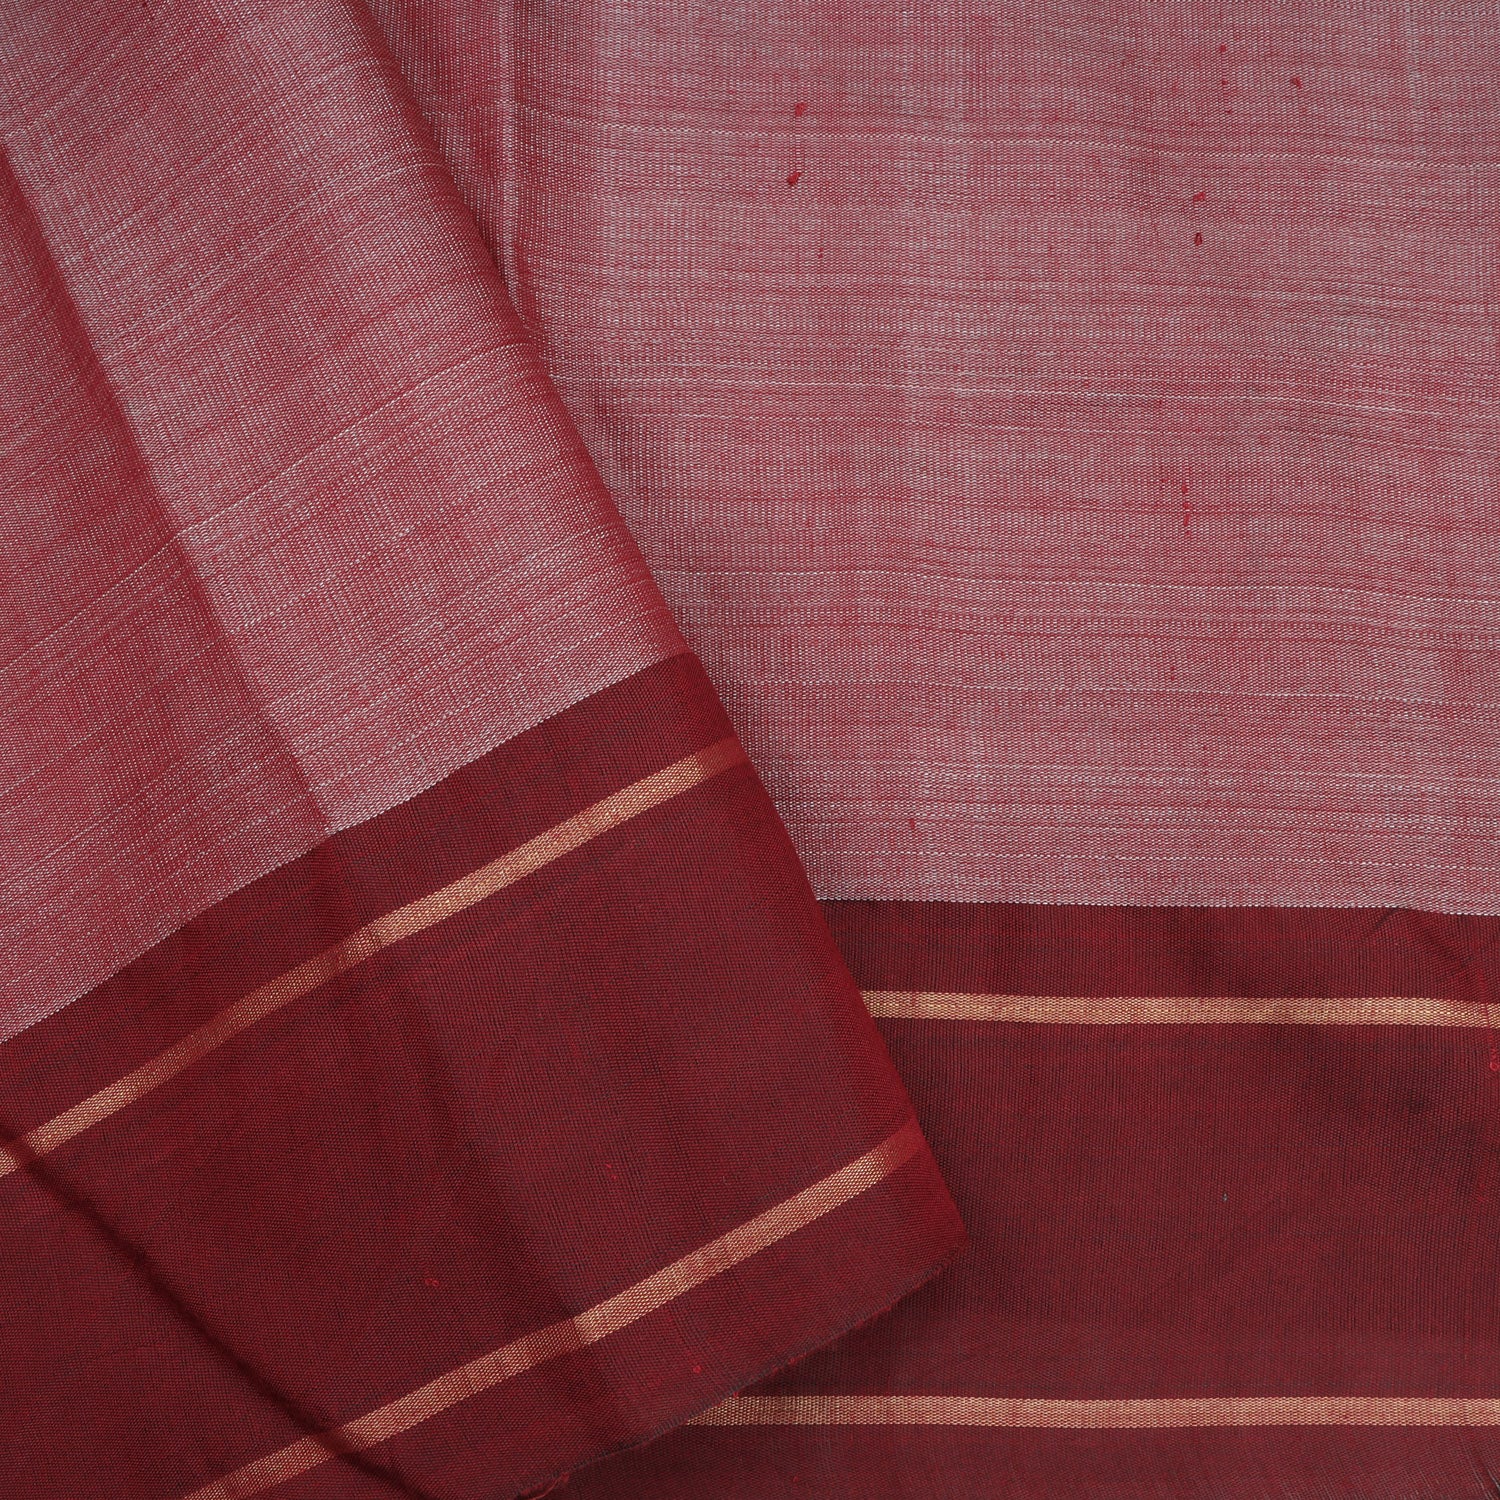 Forest Green Tussar Saree With Floral Printed Pattern